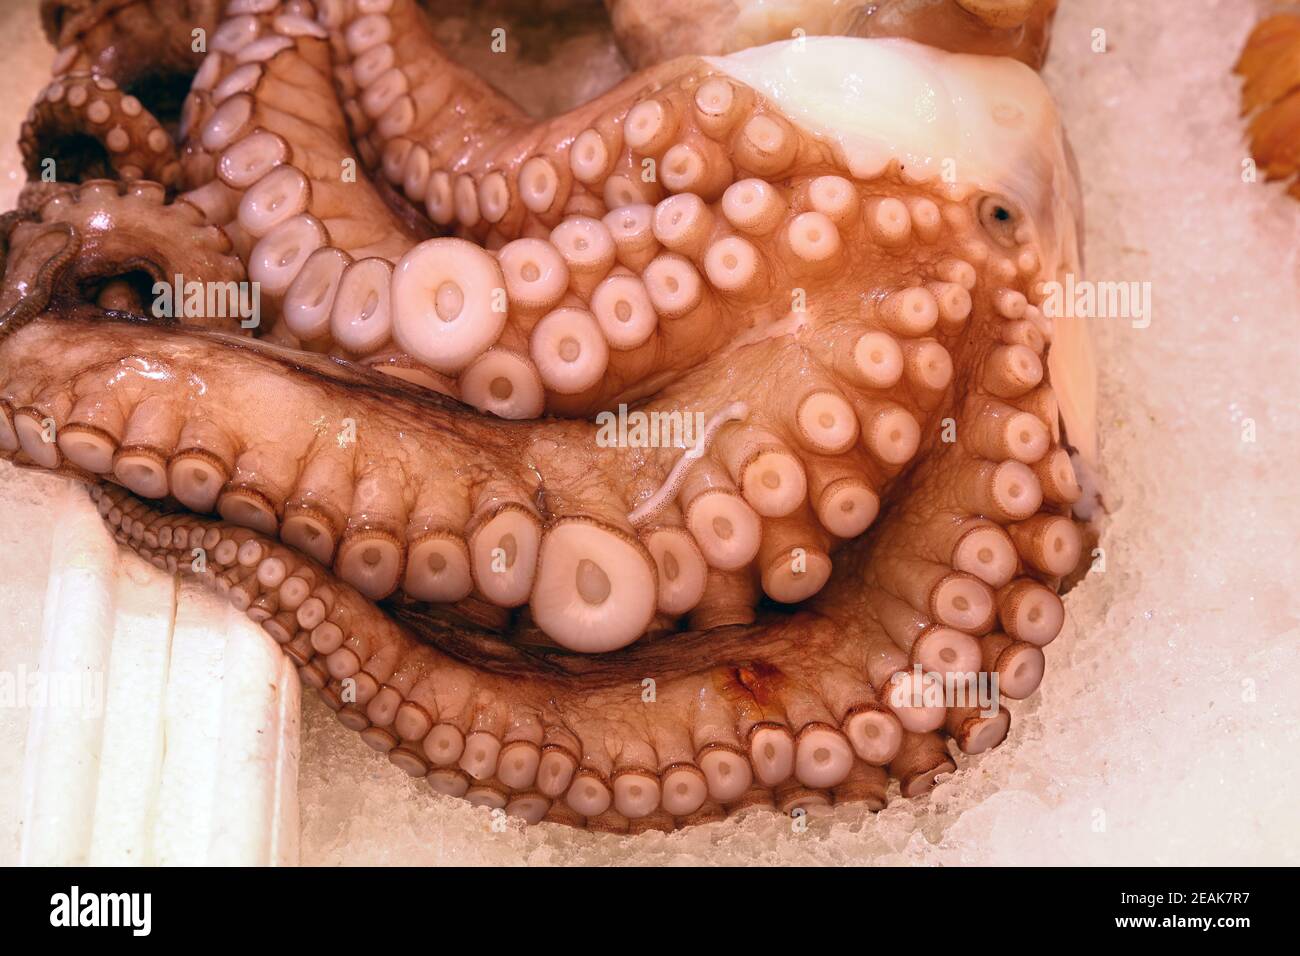 Raw octopus or cuttle fish tentacles on ice Stock Photo